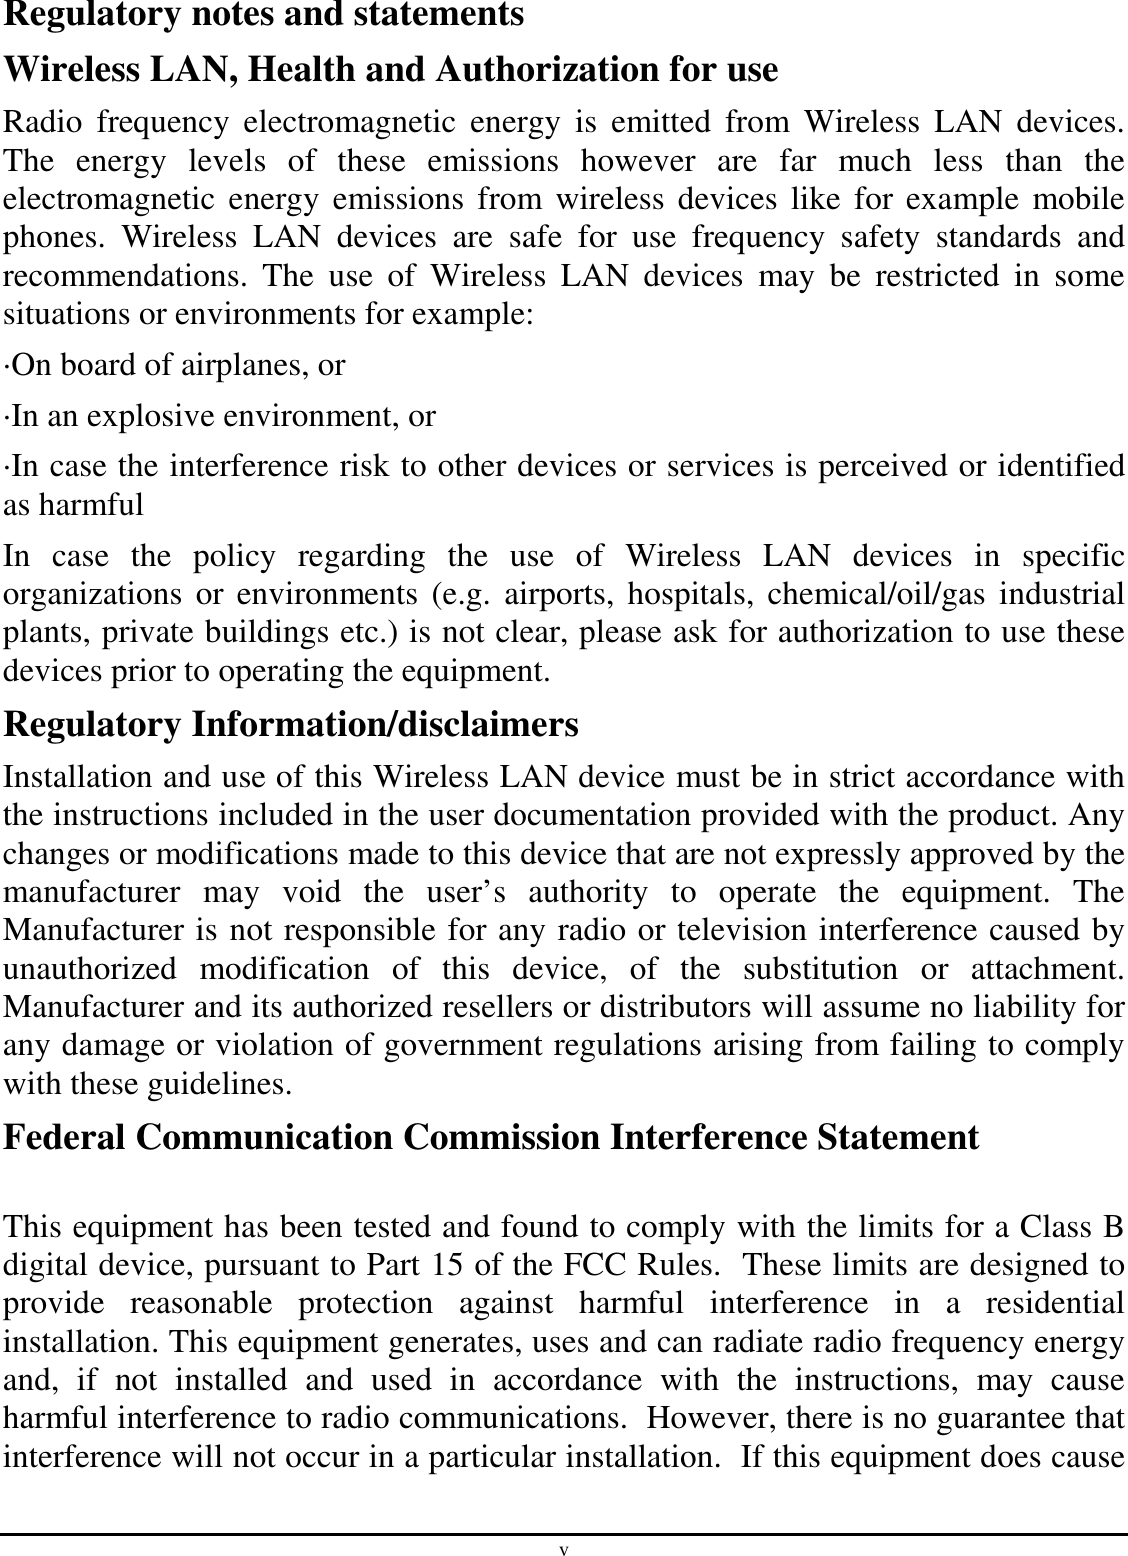 v Regulatory notes and statements Wireless LAN, Health and Authorization for use Radio  frequency  electromagnetic  energy  is  emitted  from  Wireless  LAN  devices. The  energy  levels  of  these  emissions  however  are  far  much  less  than  the electromagnetic  energy  emissions  from wireless devices like for example  mobile phones.  Wireless  LAN  devices  are  safe  for  use  frequency  safety  standards  and recommendations.  The  use  of  Wireless  LAN  devices  may  be  restricted  in  some situations or environments for example: ·On board of airplanes, or ·In an explosive environment, or ·In case the interference risk to other devices or services is perceived or identified as harmful In  case  the  policy  regarding  the  use  of  Wireless  LAN  devices  in  specific organizations  or environments  (e.g.  airports,  hospitals, chemical/oil/gas  industrial plants, private buildings etc.) is not clear, please ask for authorization to use these devices prior to operating the equipment. Regulatory Information/disclaimers Installation and use of this Wireless LAN device must be in strict accordance with the instructions included in the user documentation provided with the product. Any changes or modifications made to this device that are not expressly approved by the manufacturer  may  void  the  user’s  authority  to  operate  the  equipment.  The Manufacturer is not responsible for any radio or television interference caused by unauthorized  modification  of  this  device,  of  the  substitution  or  attachment. Manufacturer and its authorized resellers or distributors will assume no liability for any damage or violation of government regulations arising from failing to comply with these guidelines. Federal Communication Commission Interference Statement  This equipment has been tested and found to comply with the limits for a Class B digital device, pursuant to Part 15 of the FCC Rules.  These limits are designed to provide  reasonable  protection  against  harmful  interference  in  a  residential installation. This equipment generates, uses and can radiate radio frequency energy and,  if  not  installed  and  used  in  accordance  with  the  instructions,  may  cause harmful interference to radio communications.  However, there is no guarantee that interference will not occur in a particular installation.  If this equipment does cause 